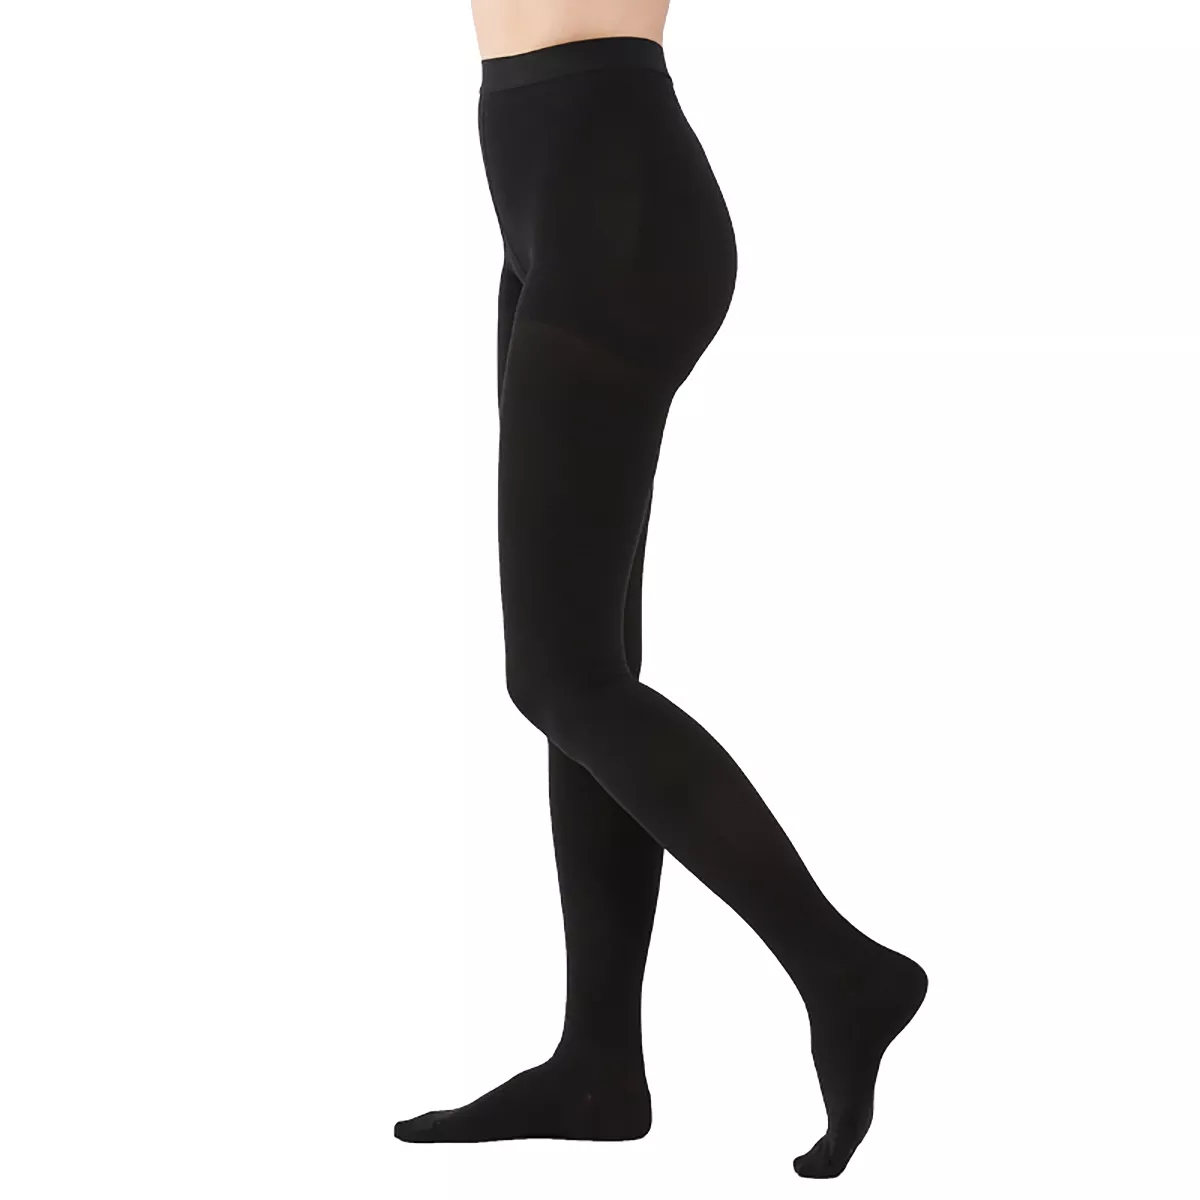 2 pairs of support tights 40 den light graduated compression, preformed heel